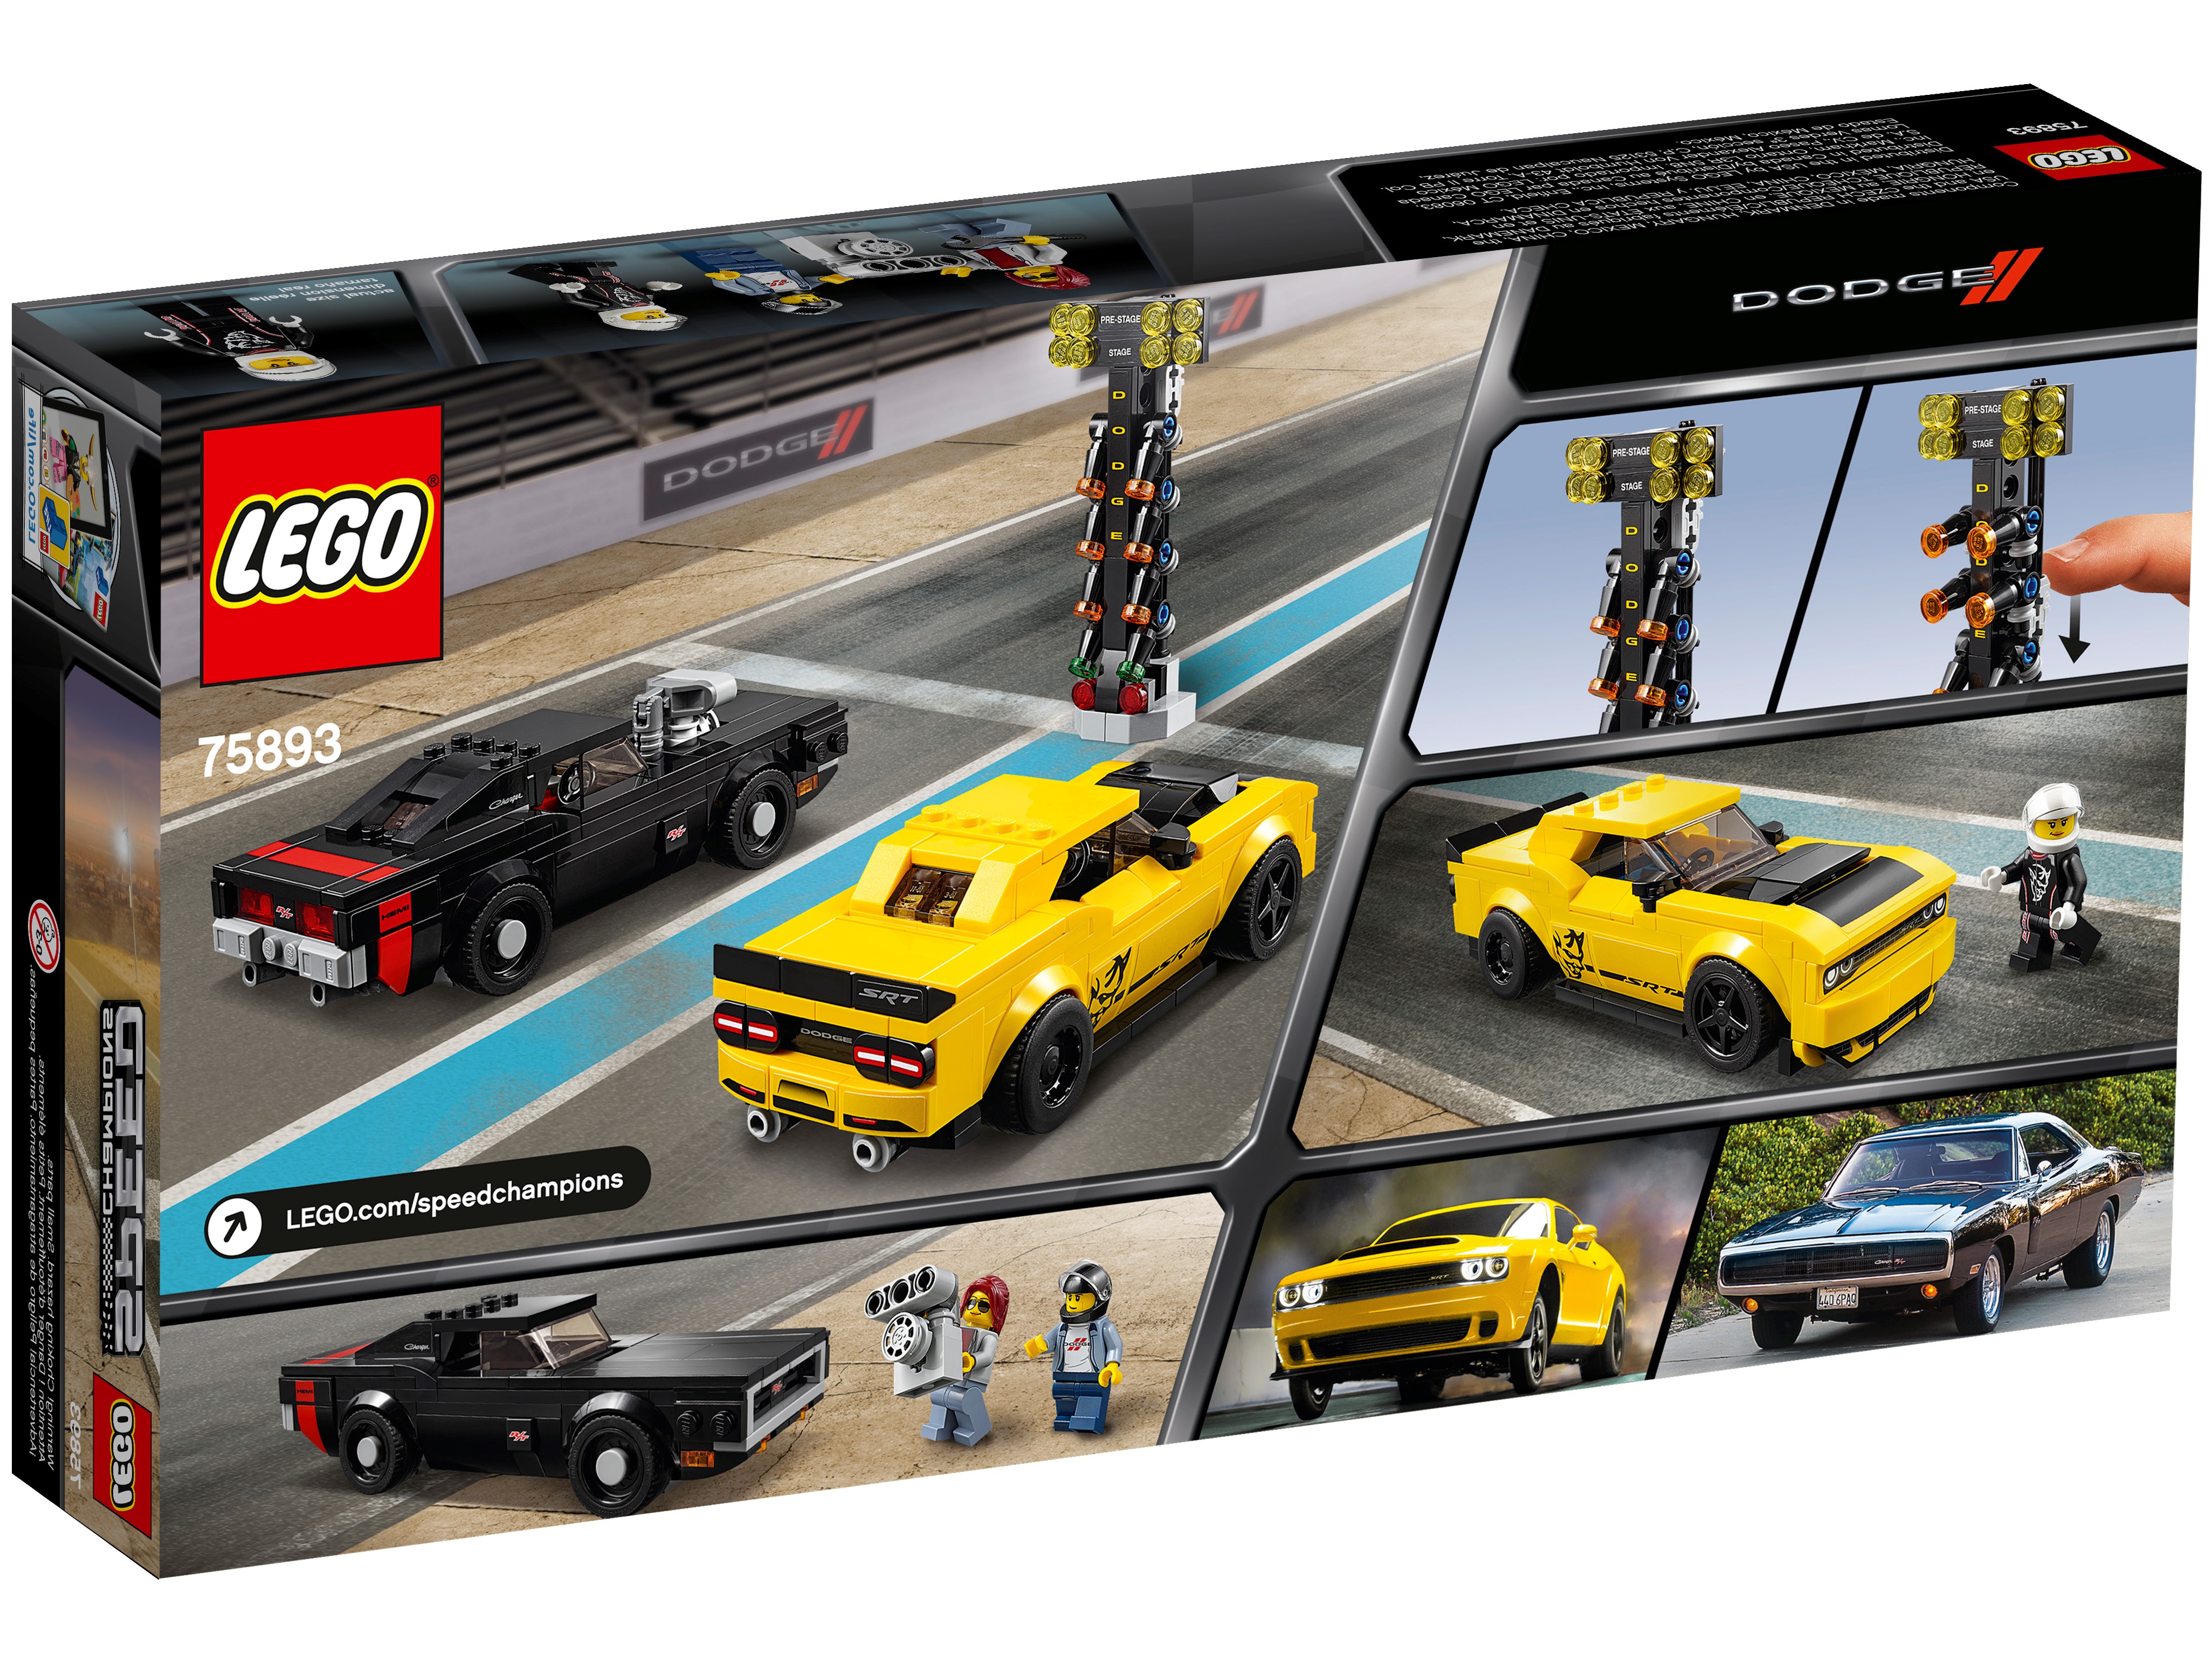 for sale online LEGO 2018 Dodge Challenger SRT Demon and 1970 Speed Champions 75893 